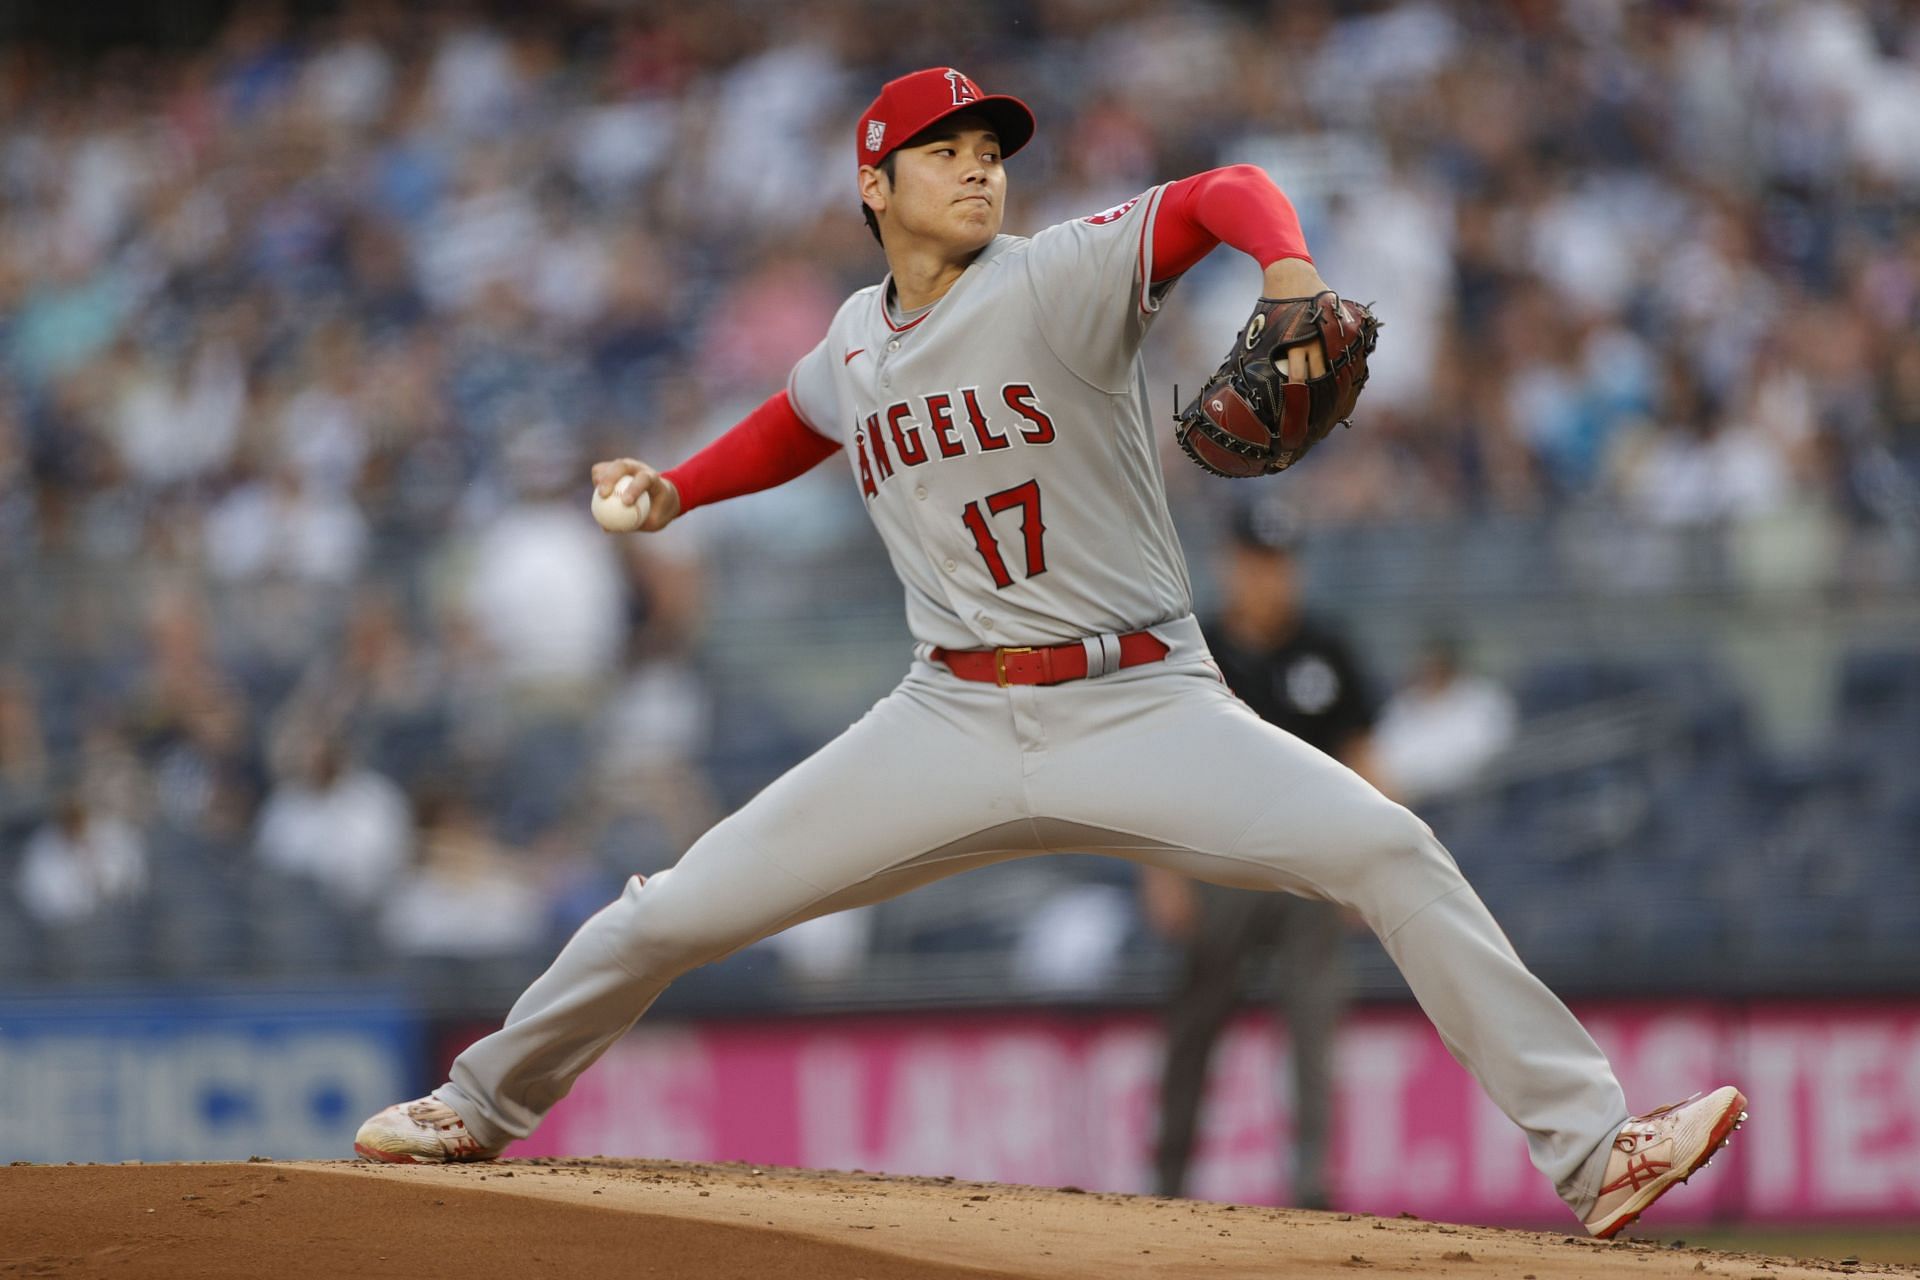 Shohei Ohtani of the Los Angeles Angels pitches during the first inning against the New York Yankees at Yankee Stadium on June 30, 2021, in the Bronx borough of New York City.